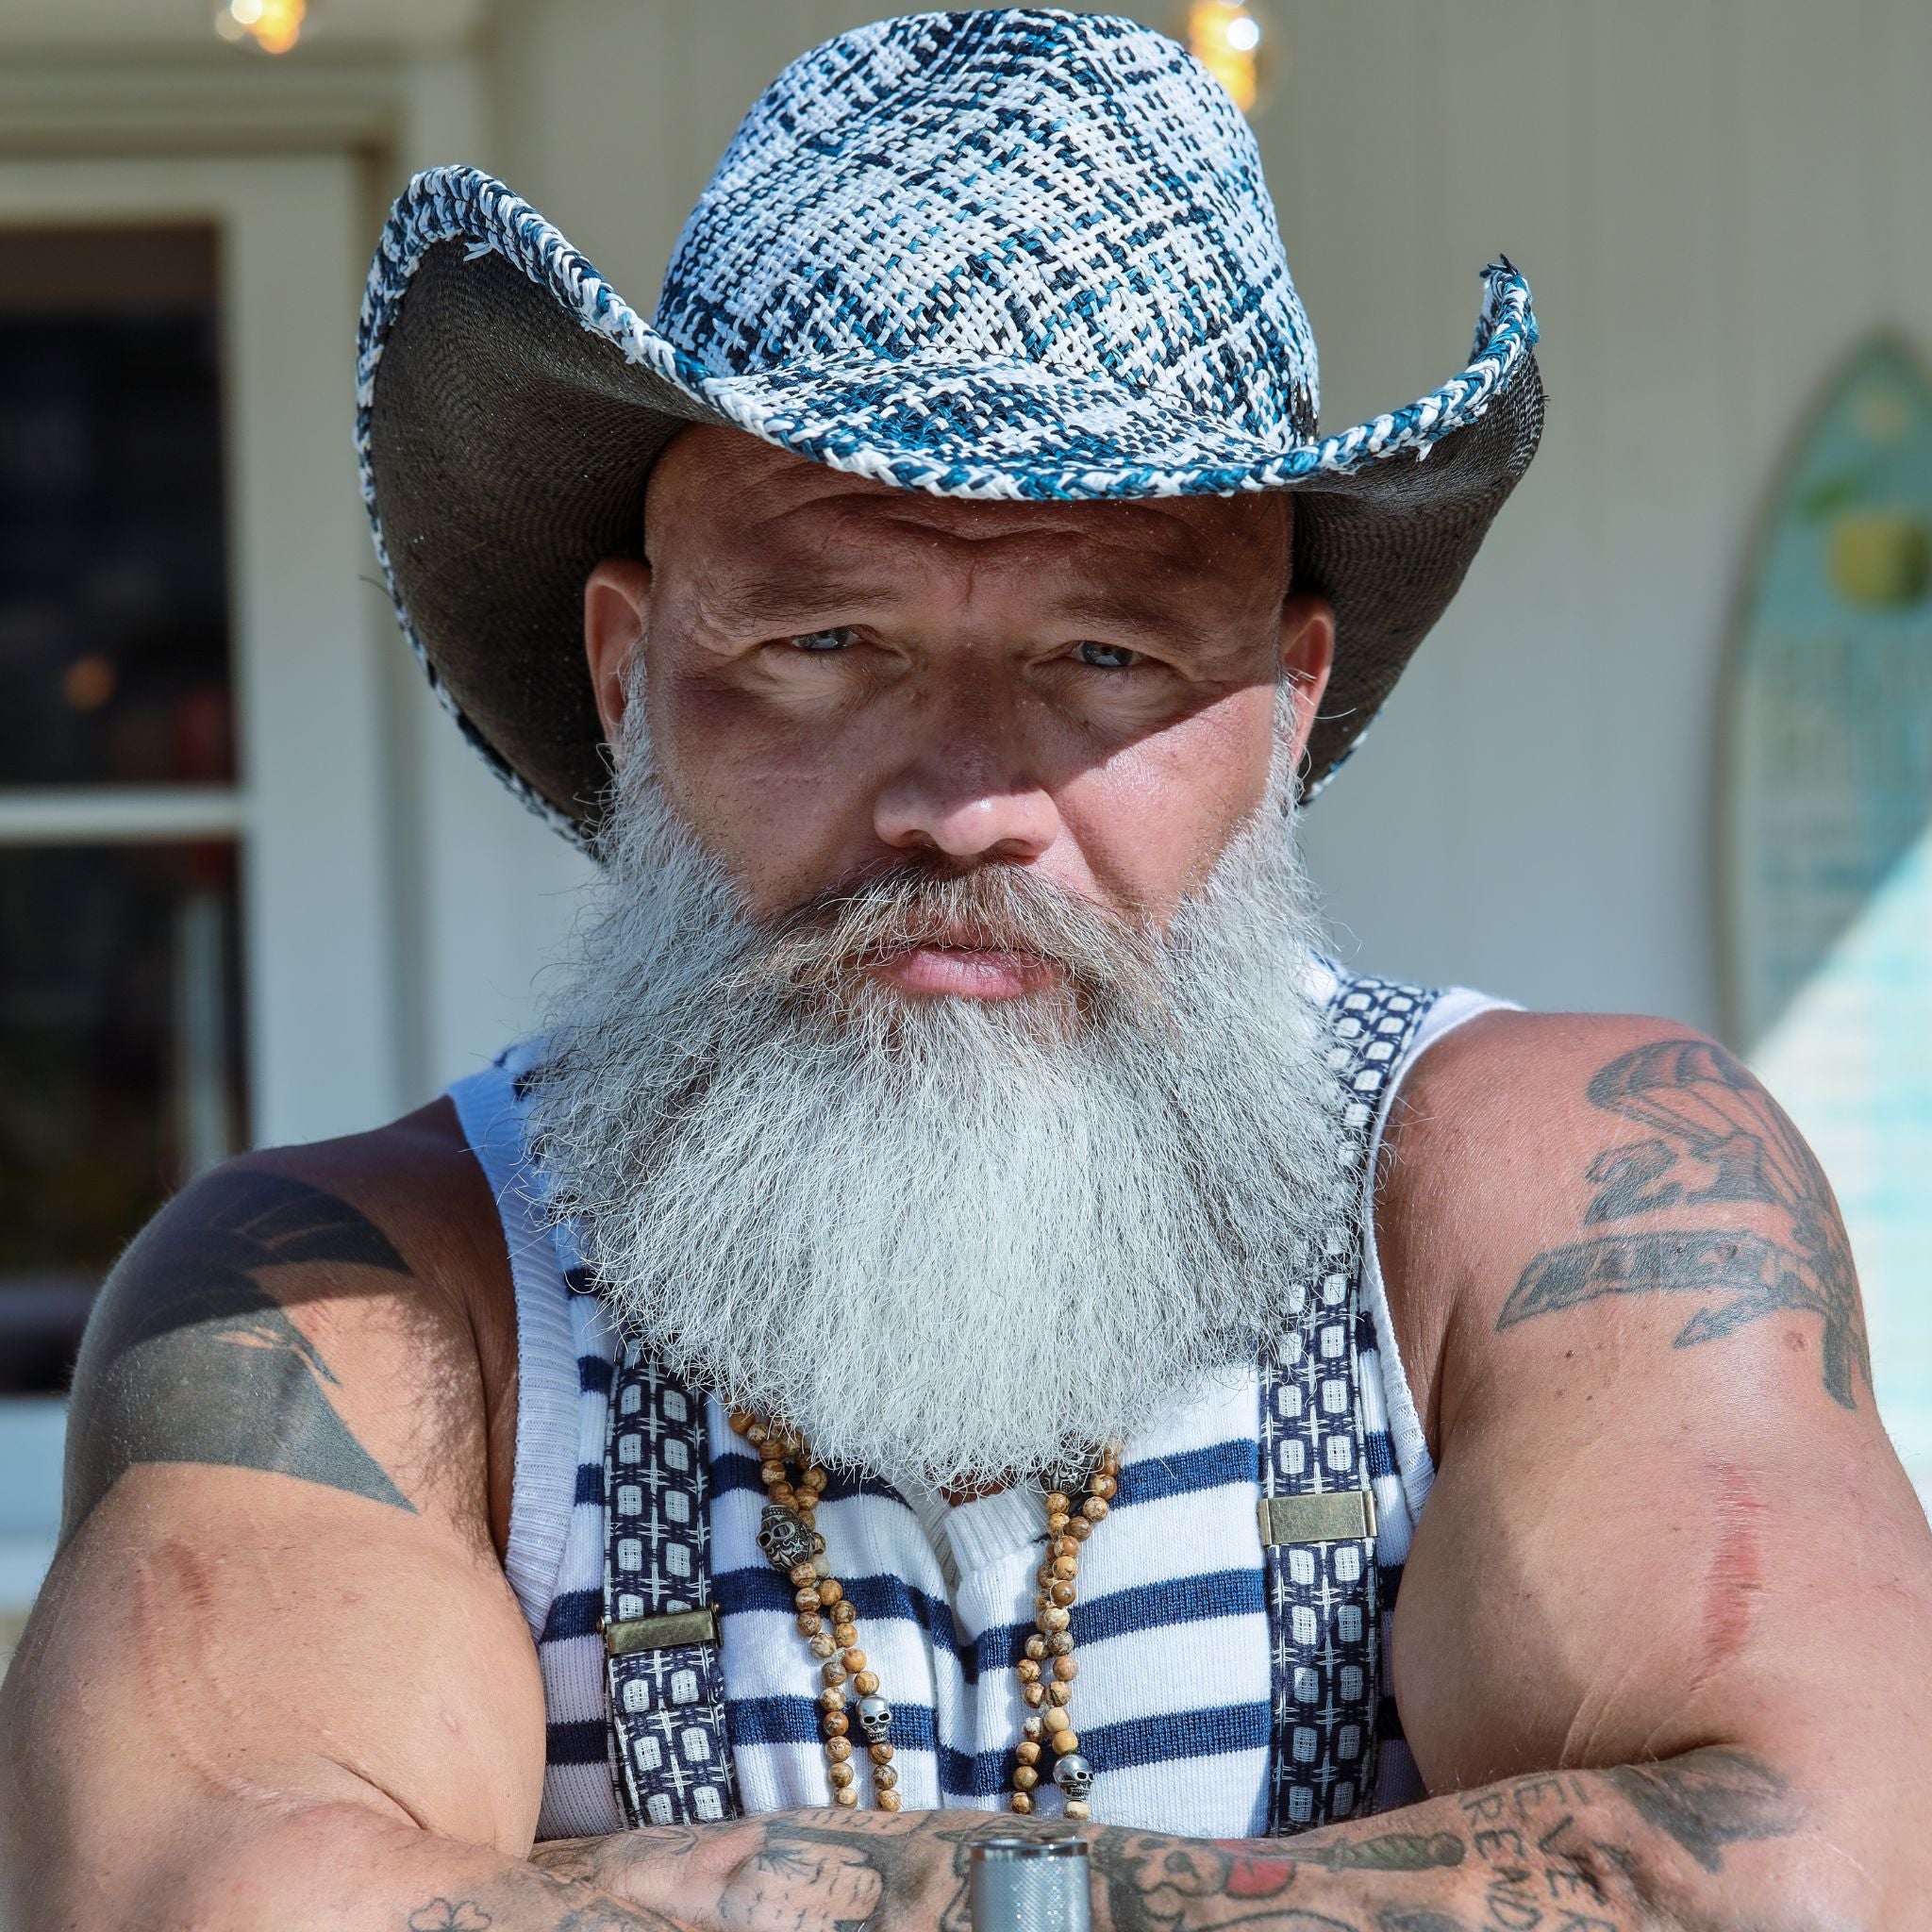 Portrait of man looking in camera, he's wearing a blue and white colored cowboy hat and checkered suspenders.